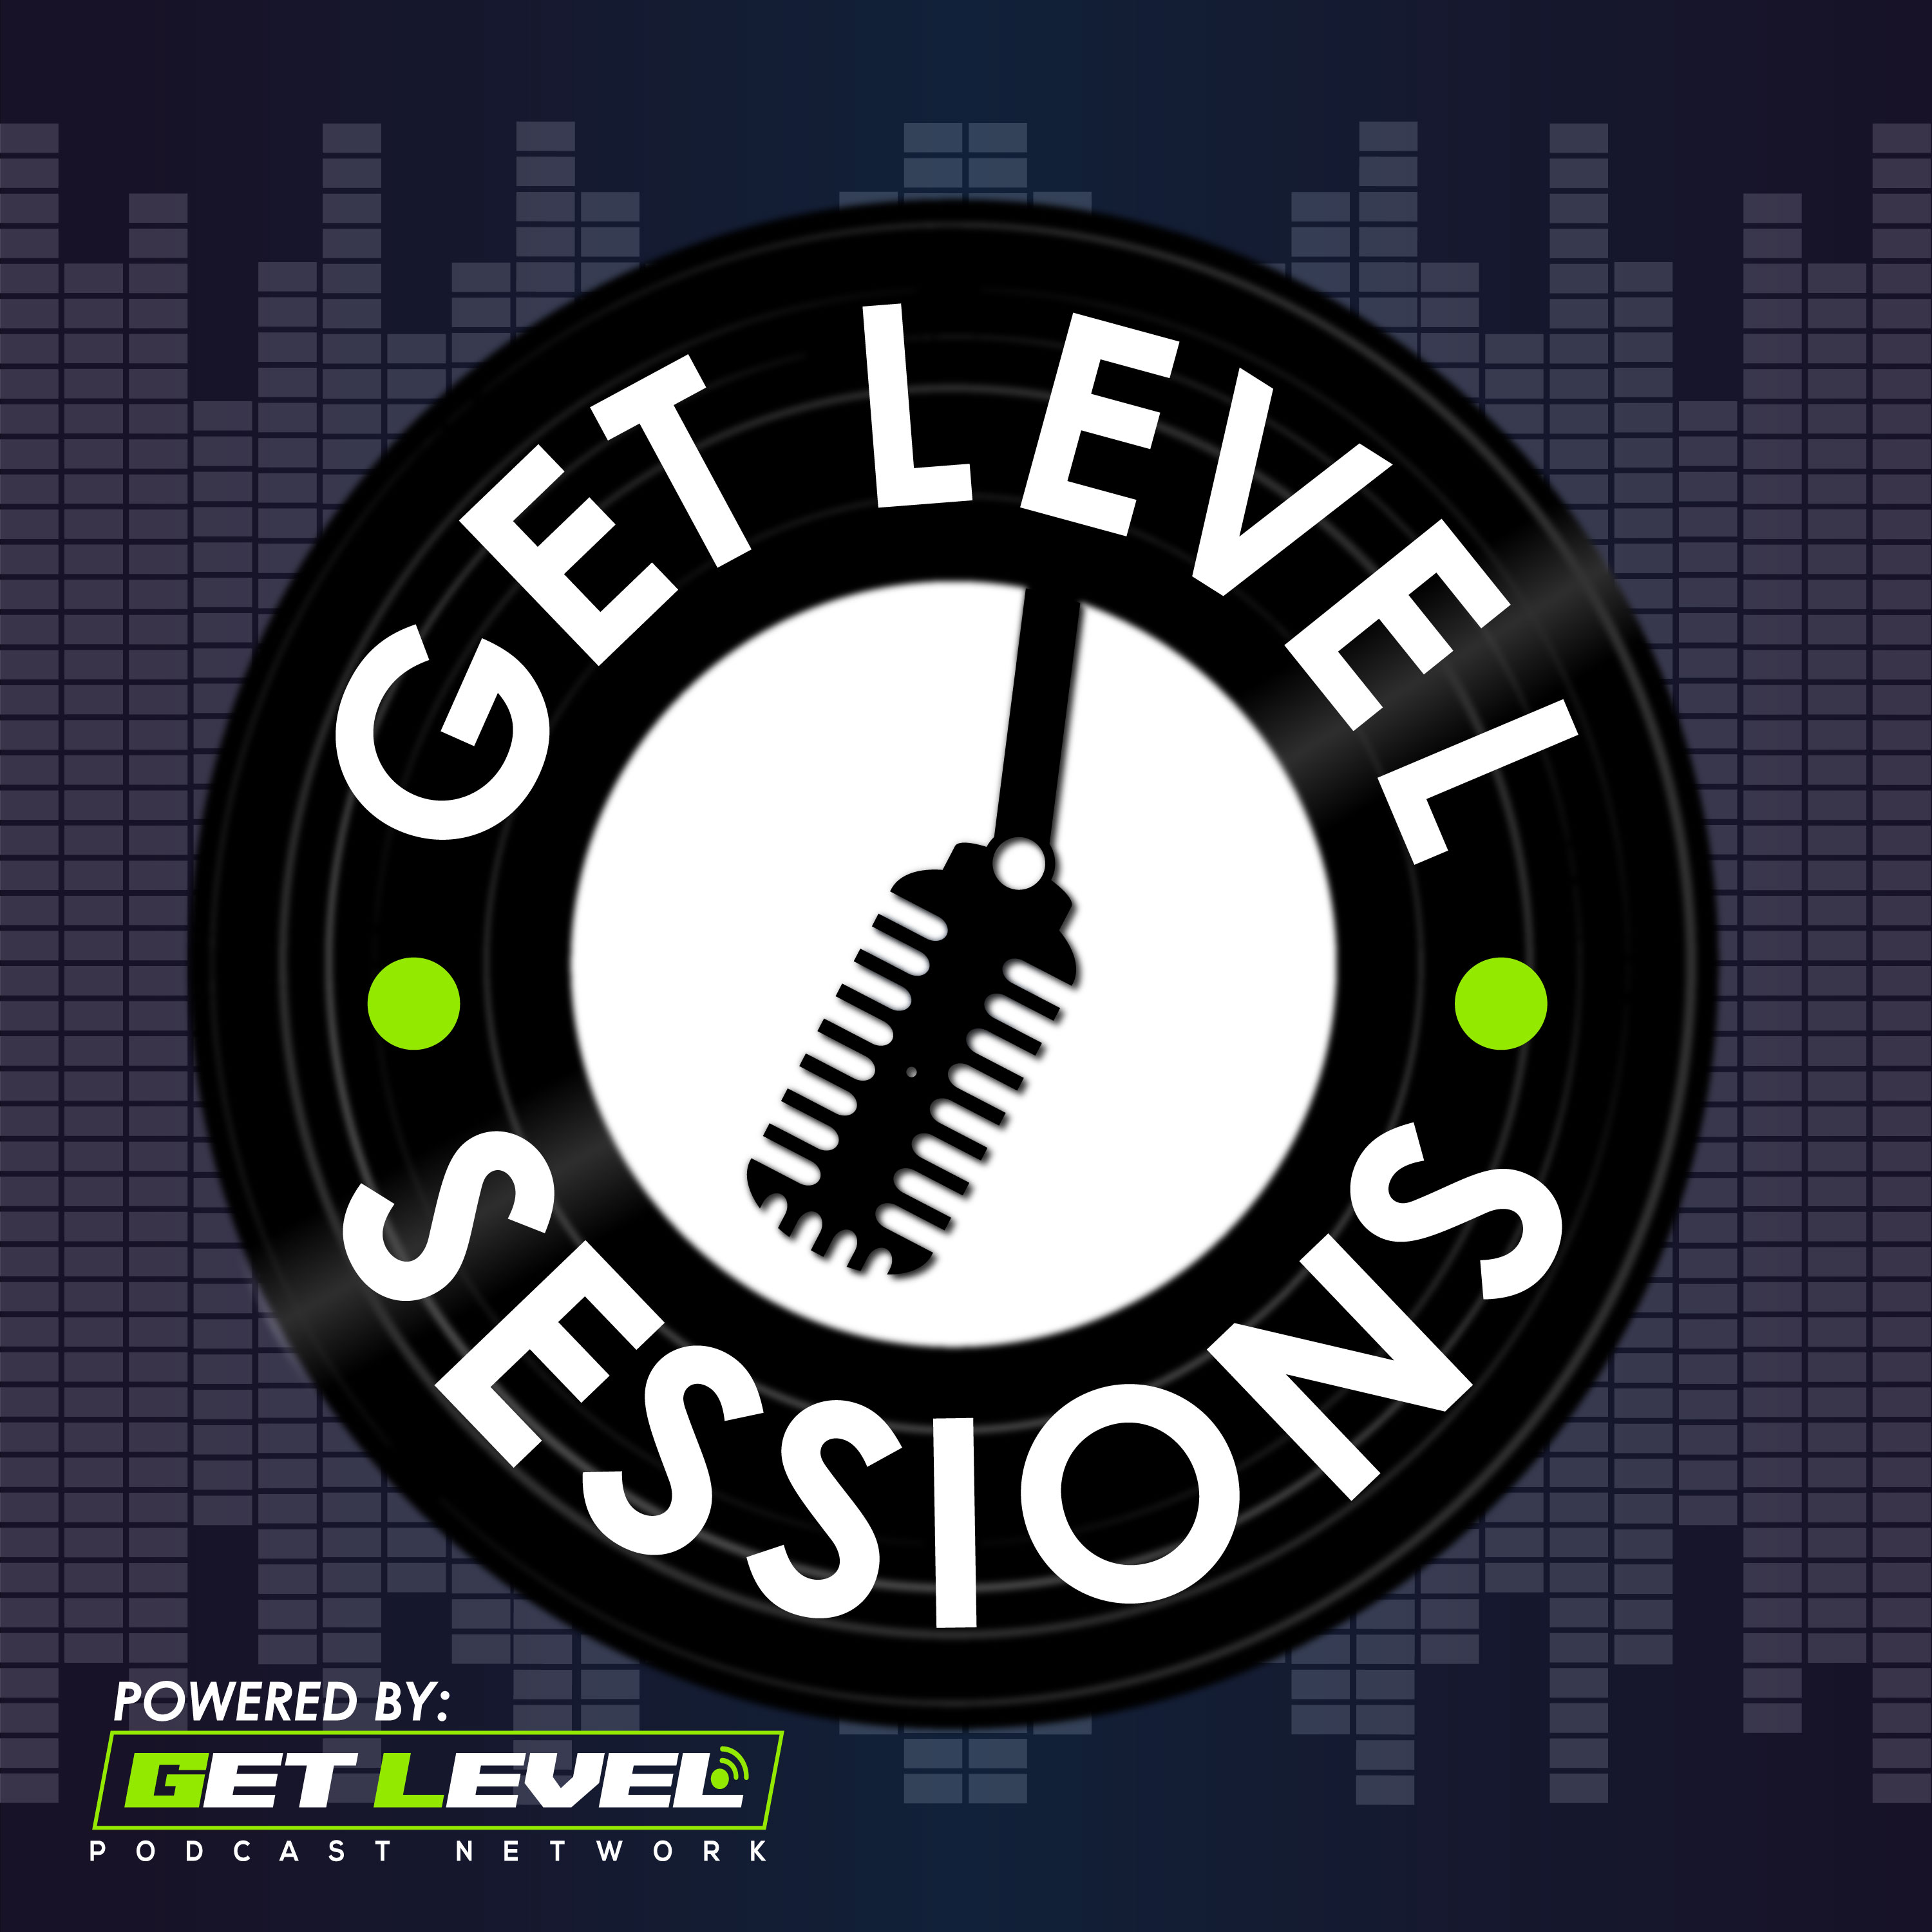 Artwork for podcast The Get Level Sessions